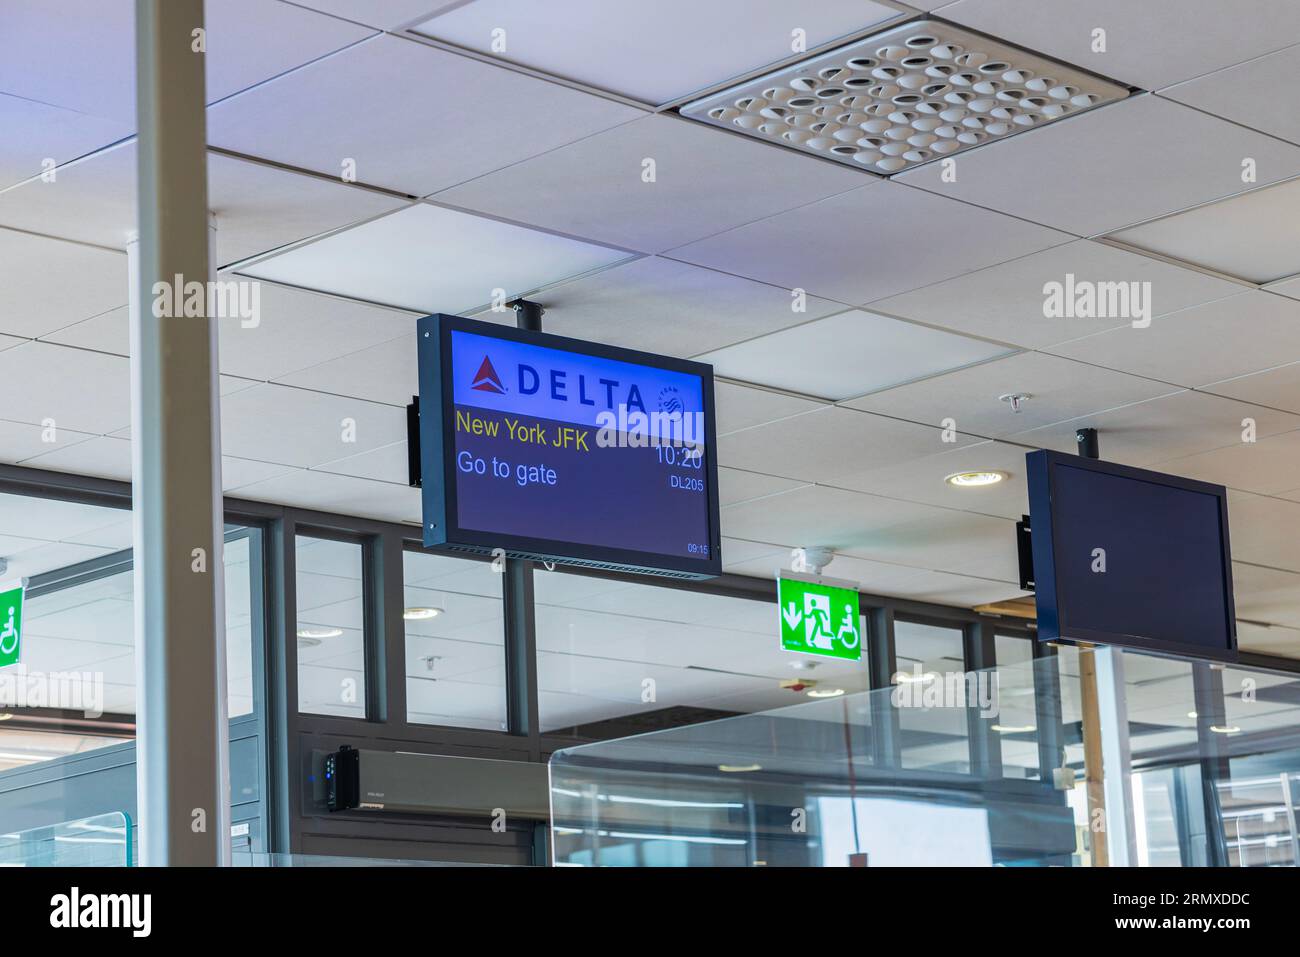 Сlose-up view of Delta airline information display at airport gate with departure information for New York USA. Stock Photo